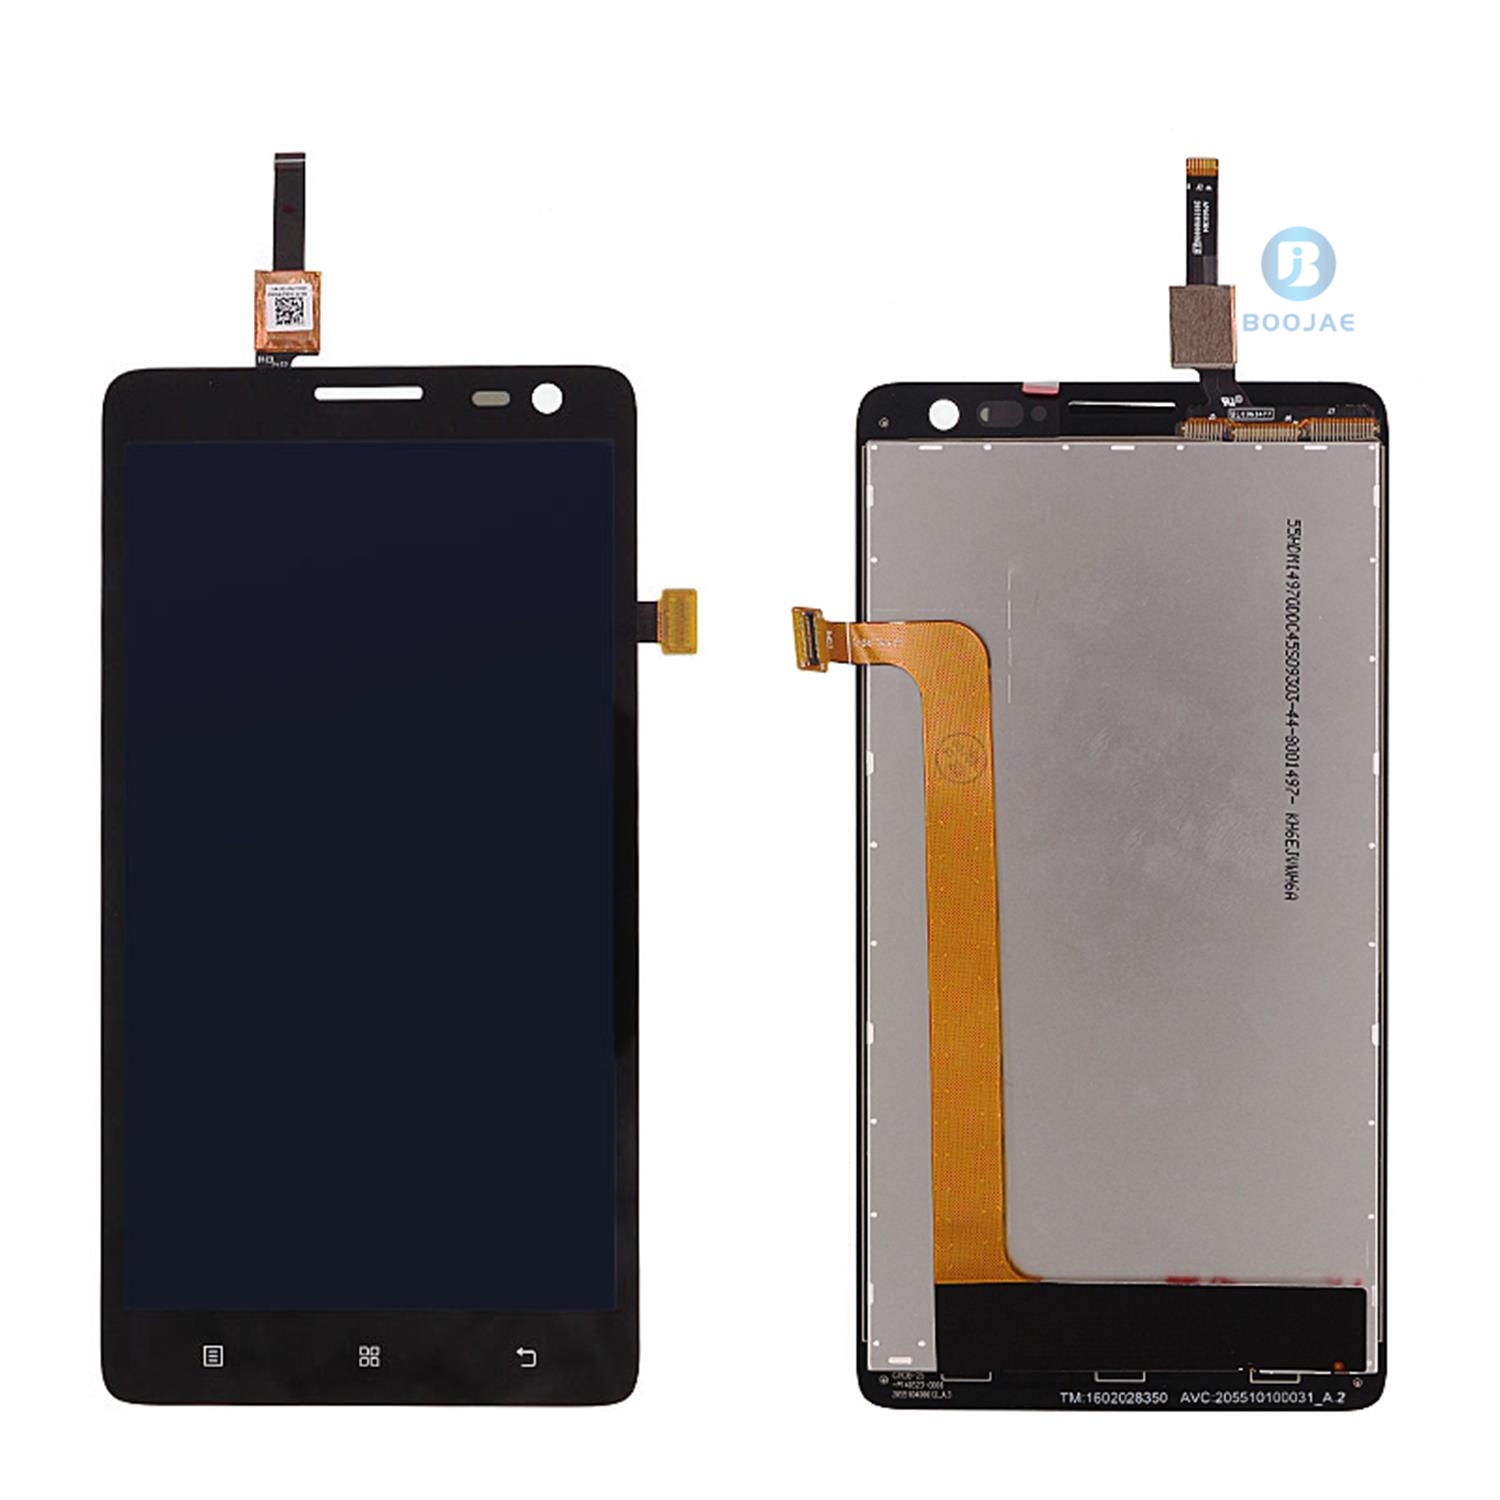 For Lenovo S856 LCD Screen Display and Touch Panel Digitizer Assembly Replacement